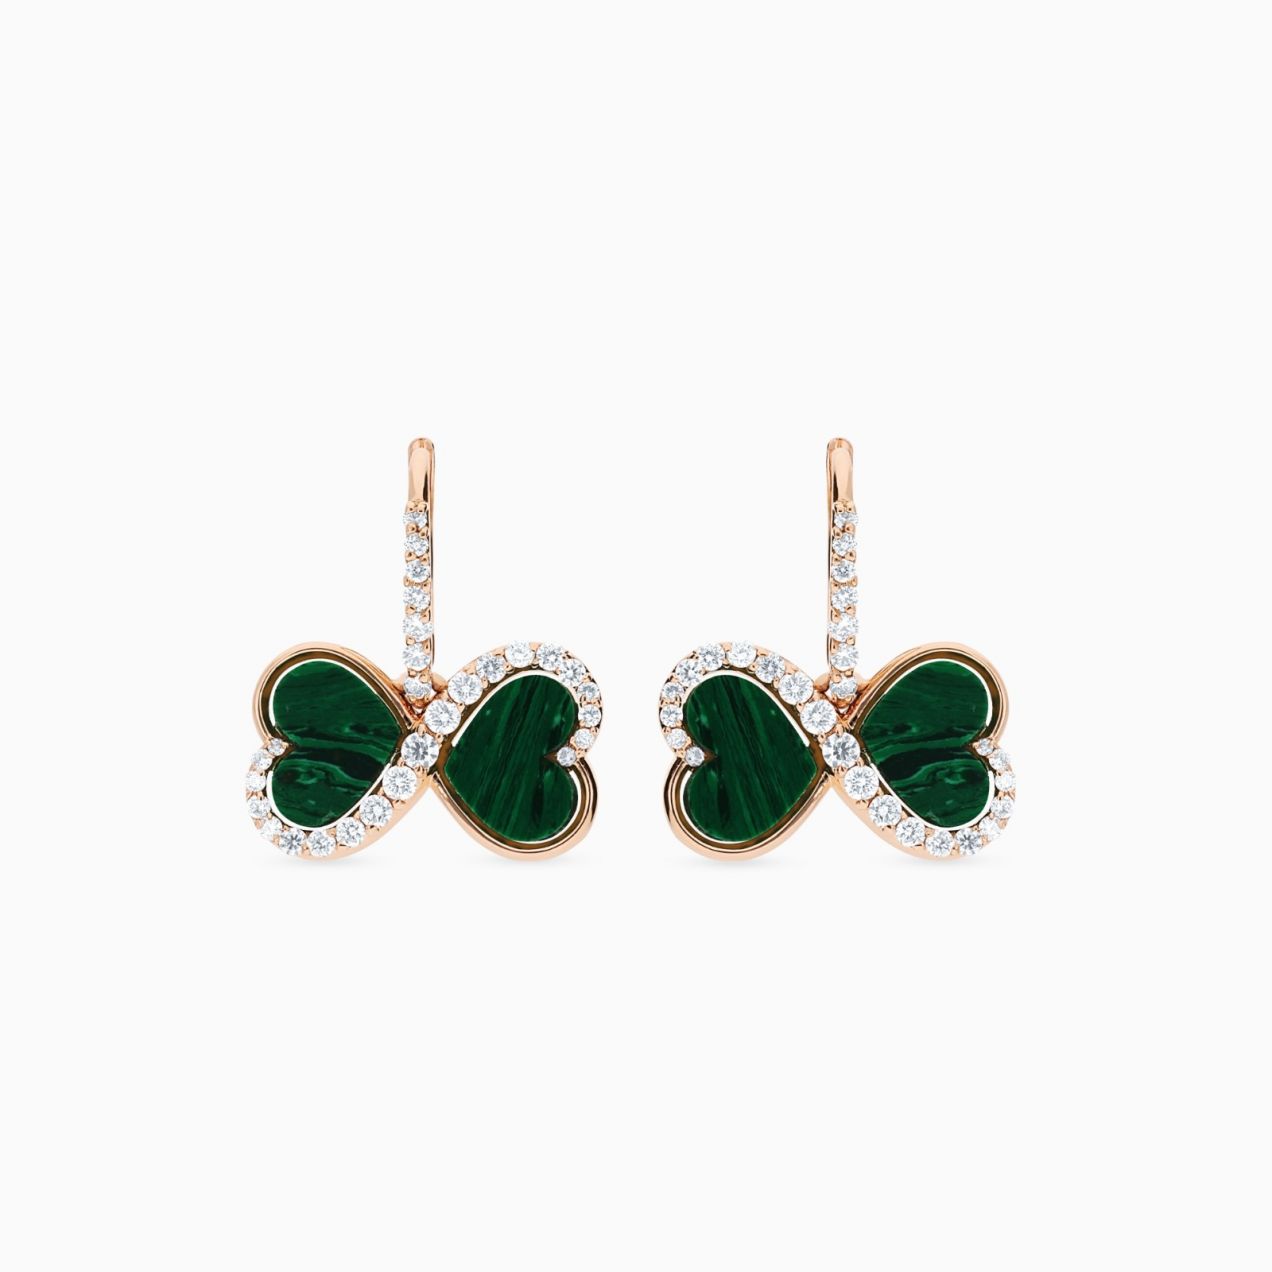 Infinity symbol earrings in rose gold with heart-cut malachite and diamonds